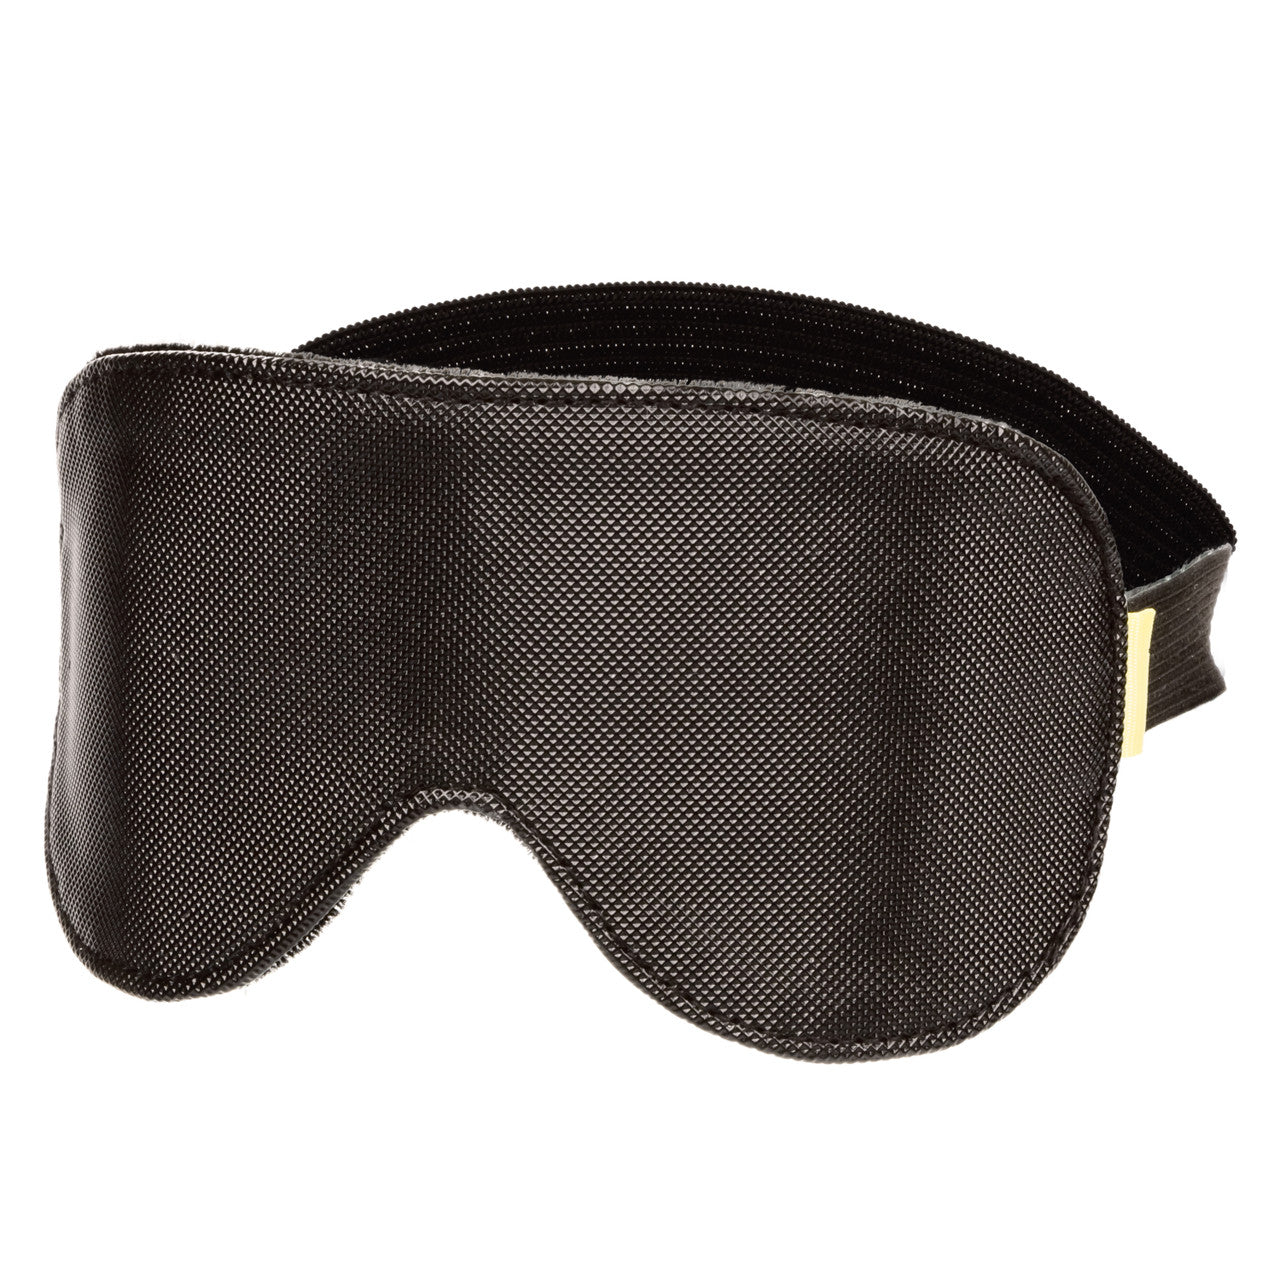 Boundless Blackout Eye Mask - Thorn & Feather